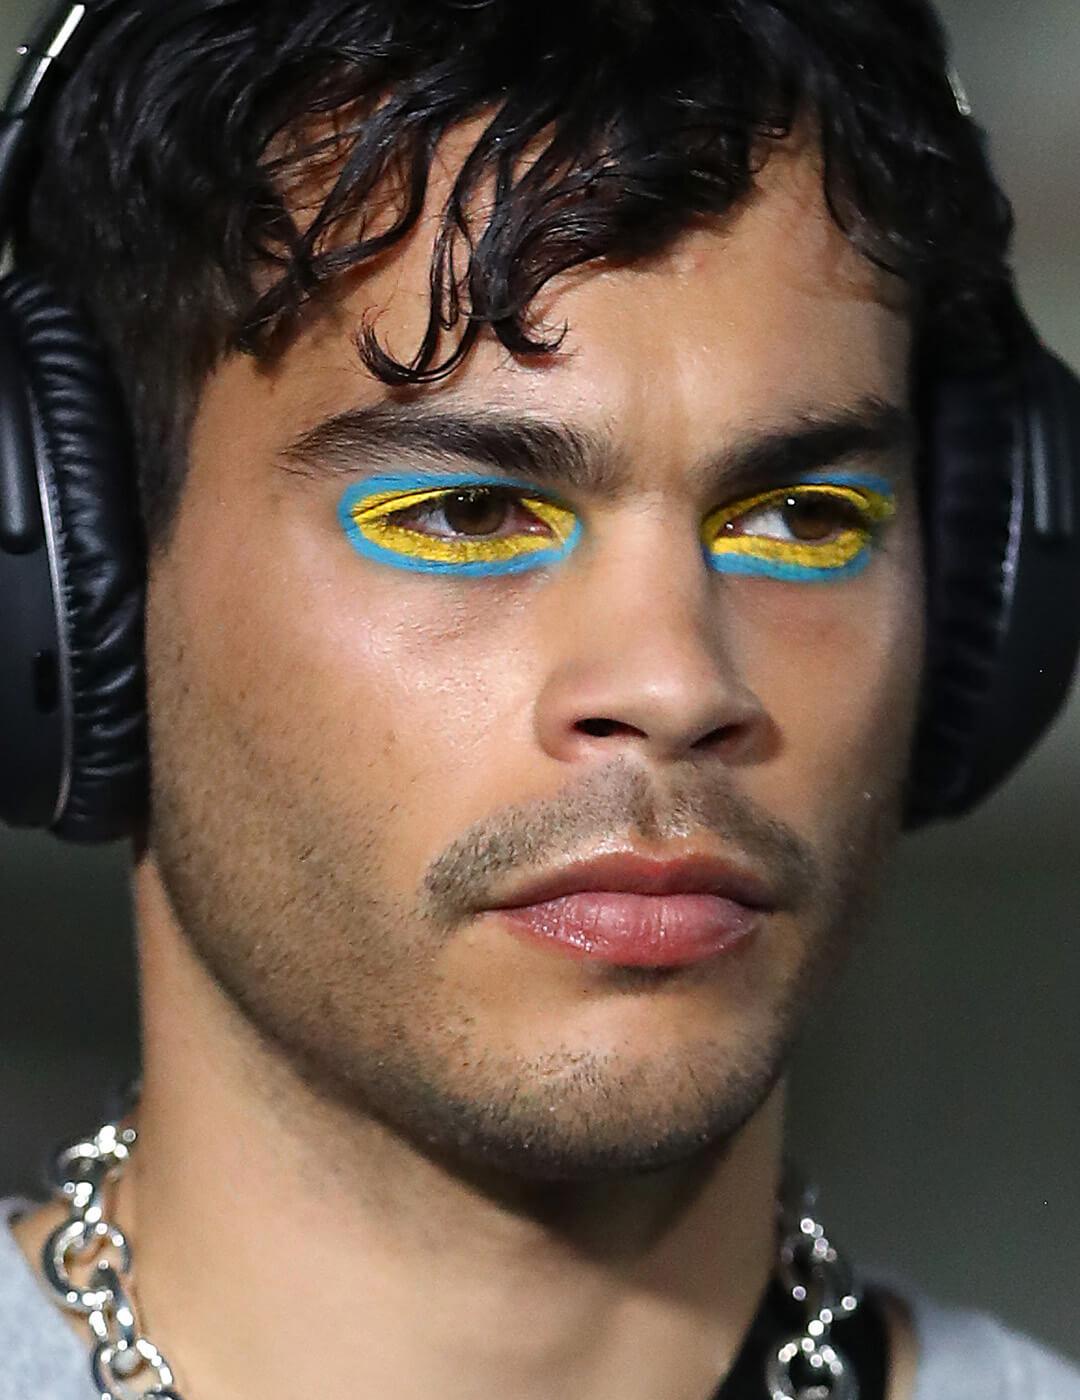 Male model wearing black headphones, silver necklace, and blue and yellow eyeshadow makeup